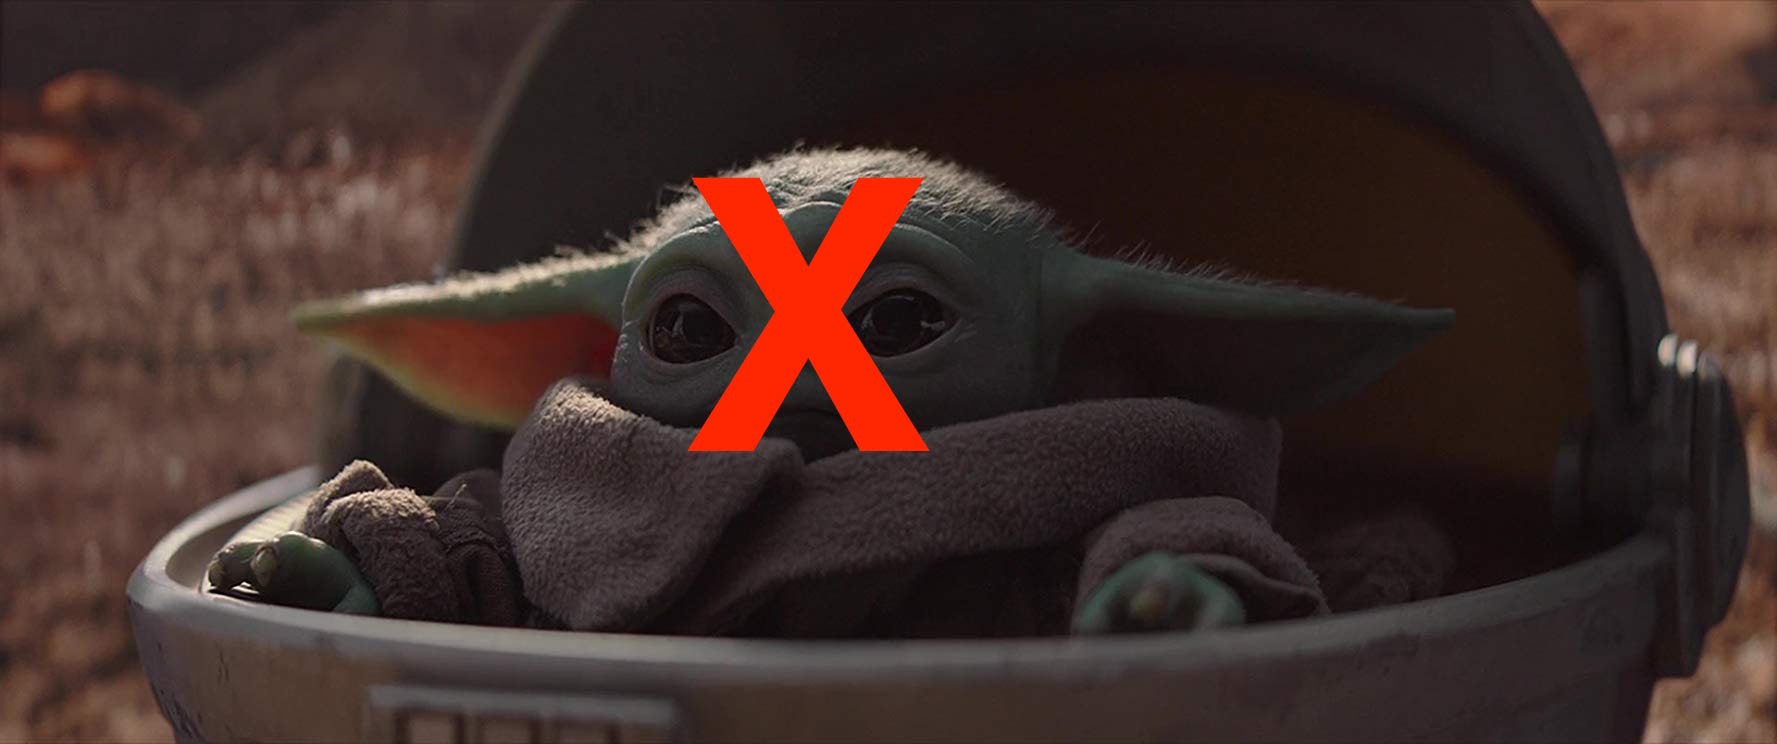 Disney Has Gone Too Far With Baby Yoda The Outline